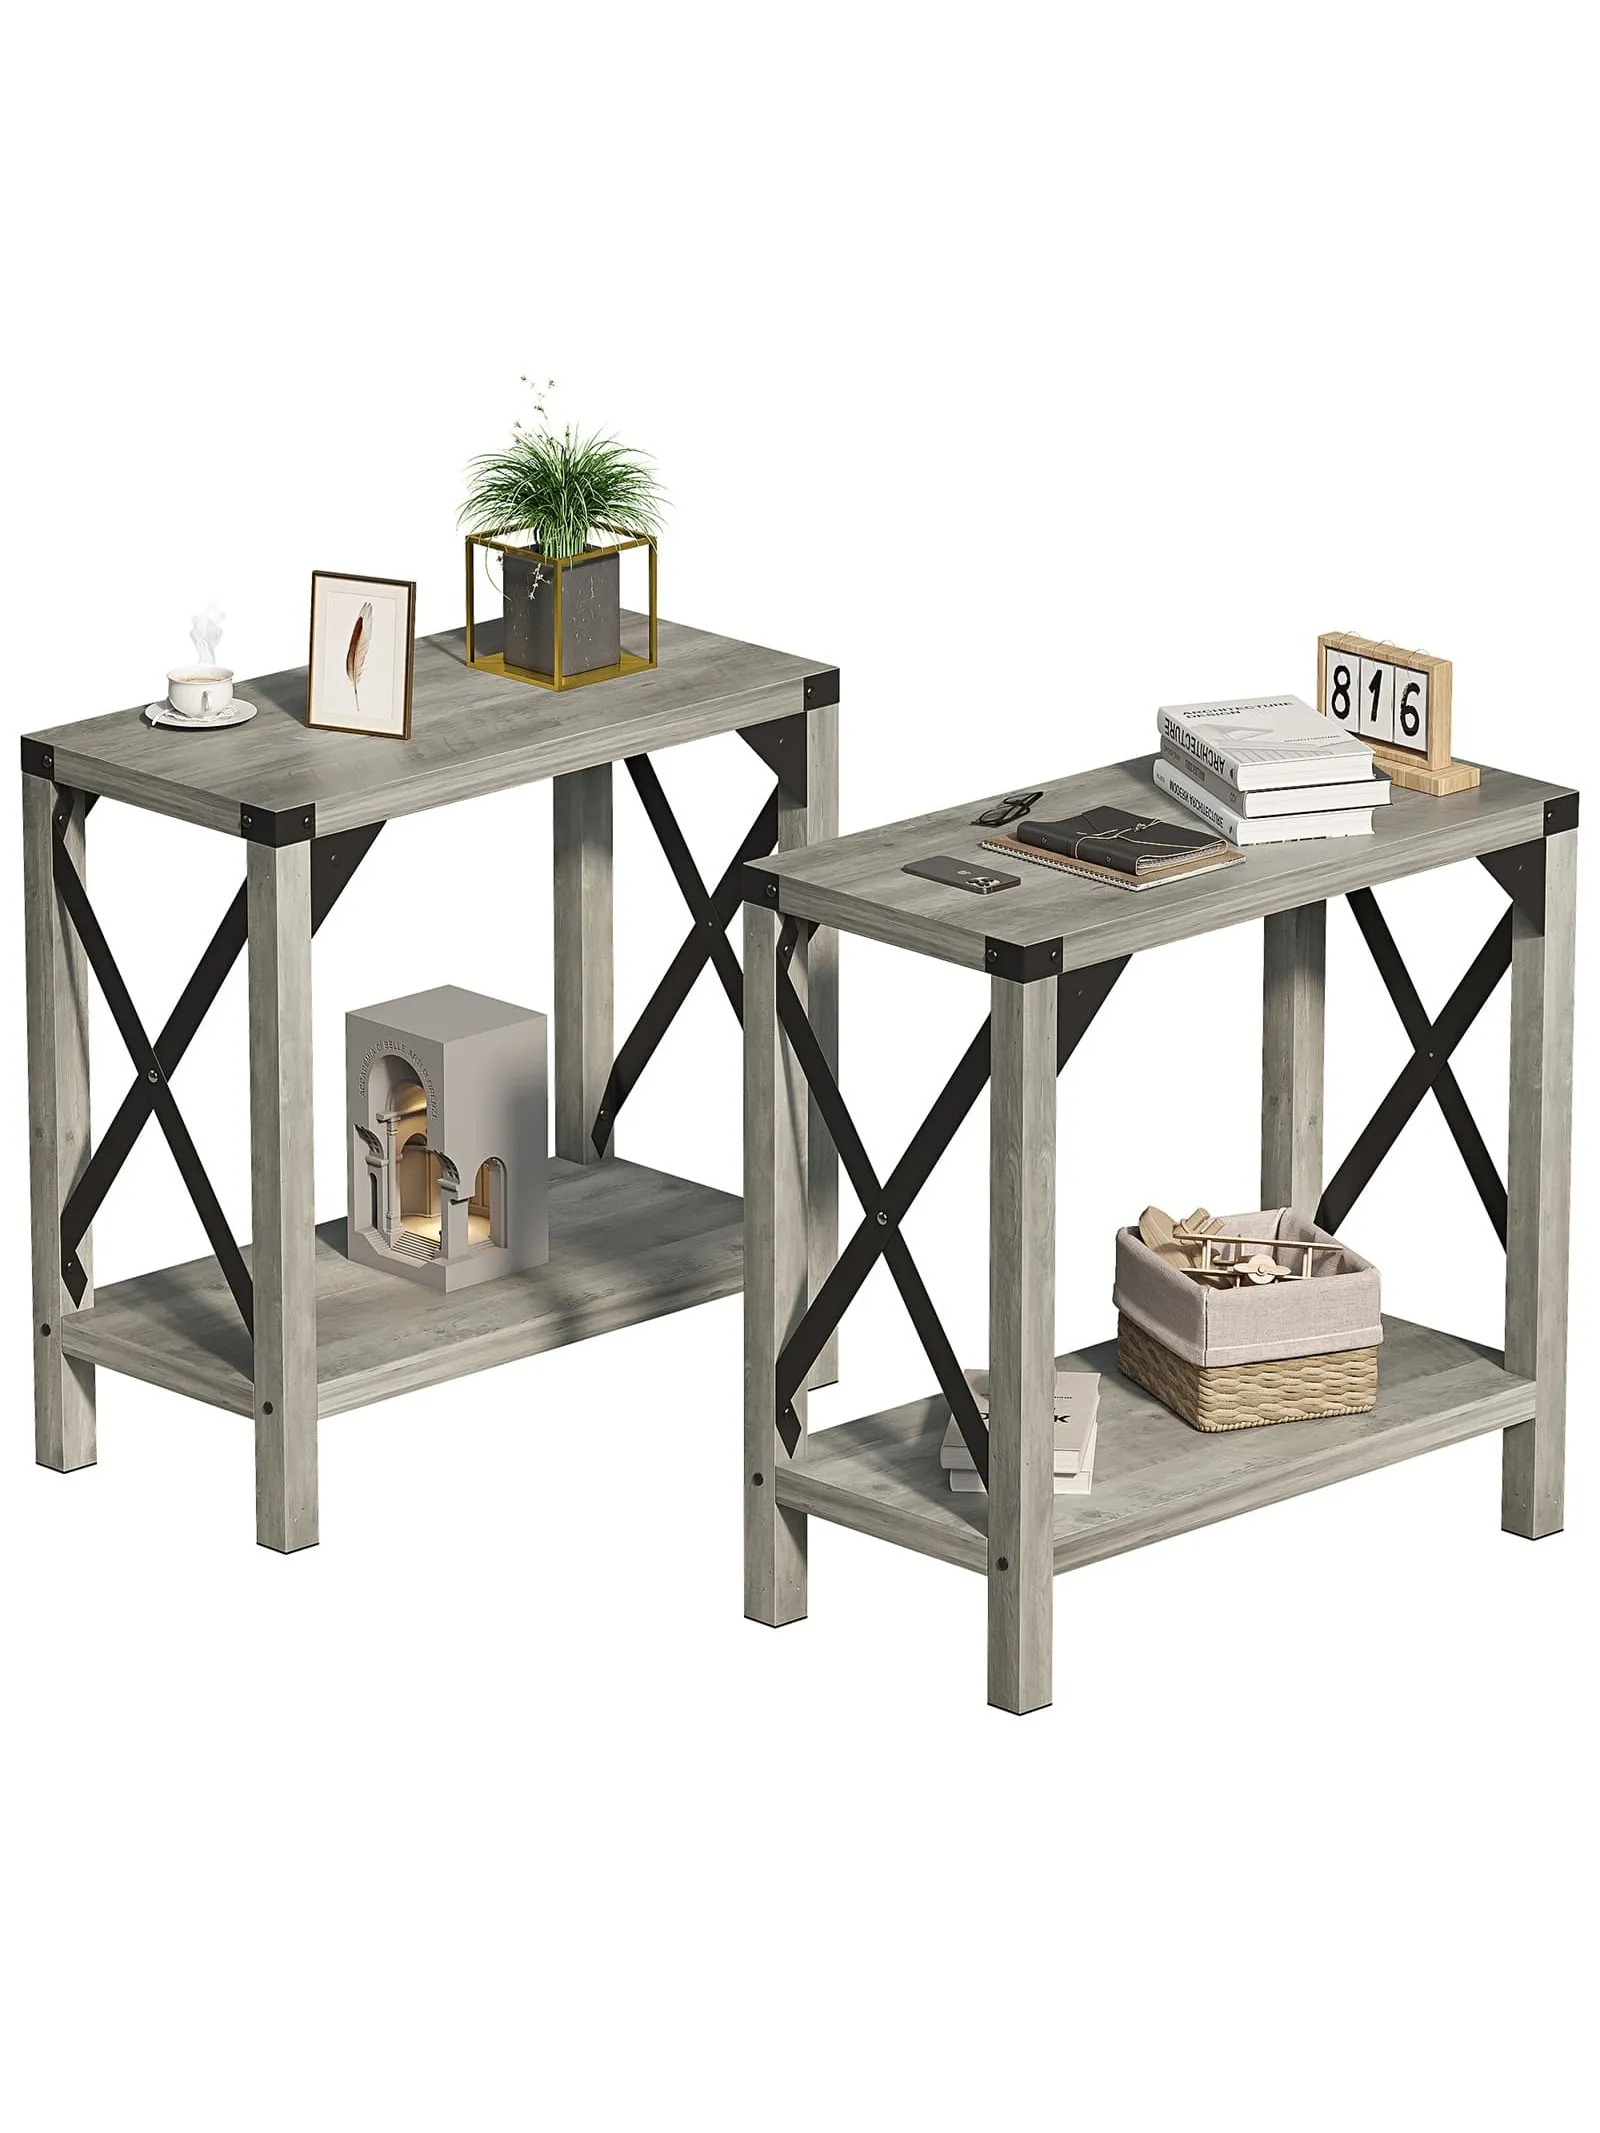 End Table Set of 1/2, Farmhouse Side Table with Storage, Small Entryway Table for Small Spaces Grey End Table for Living Room